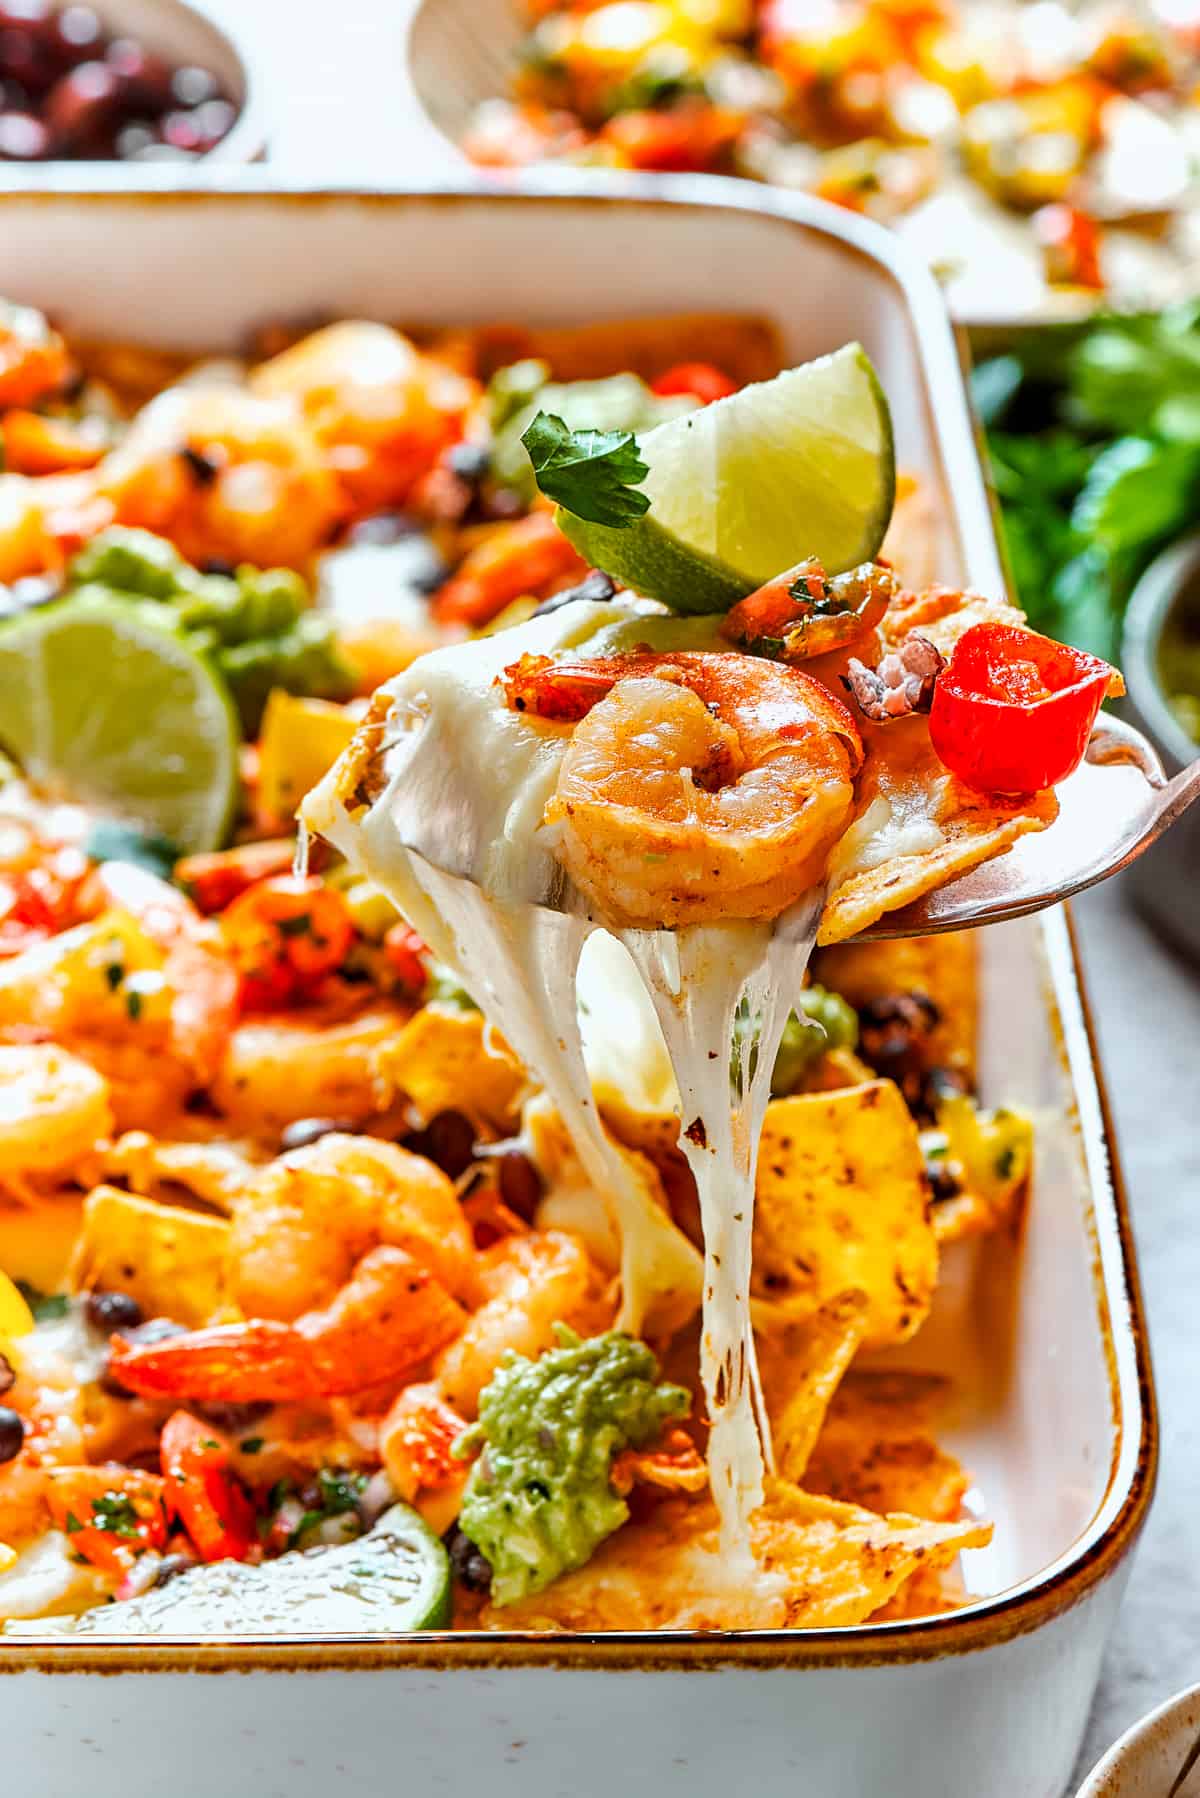 A spoon lifts out a cheesy portion of shrimp nachos.